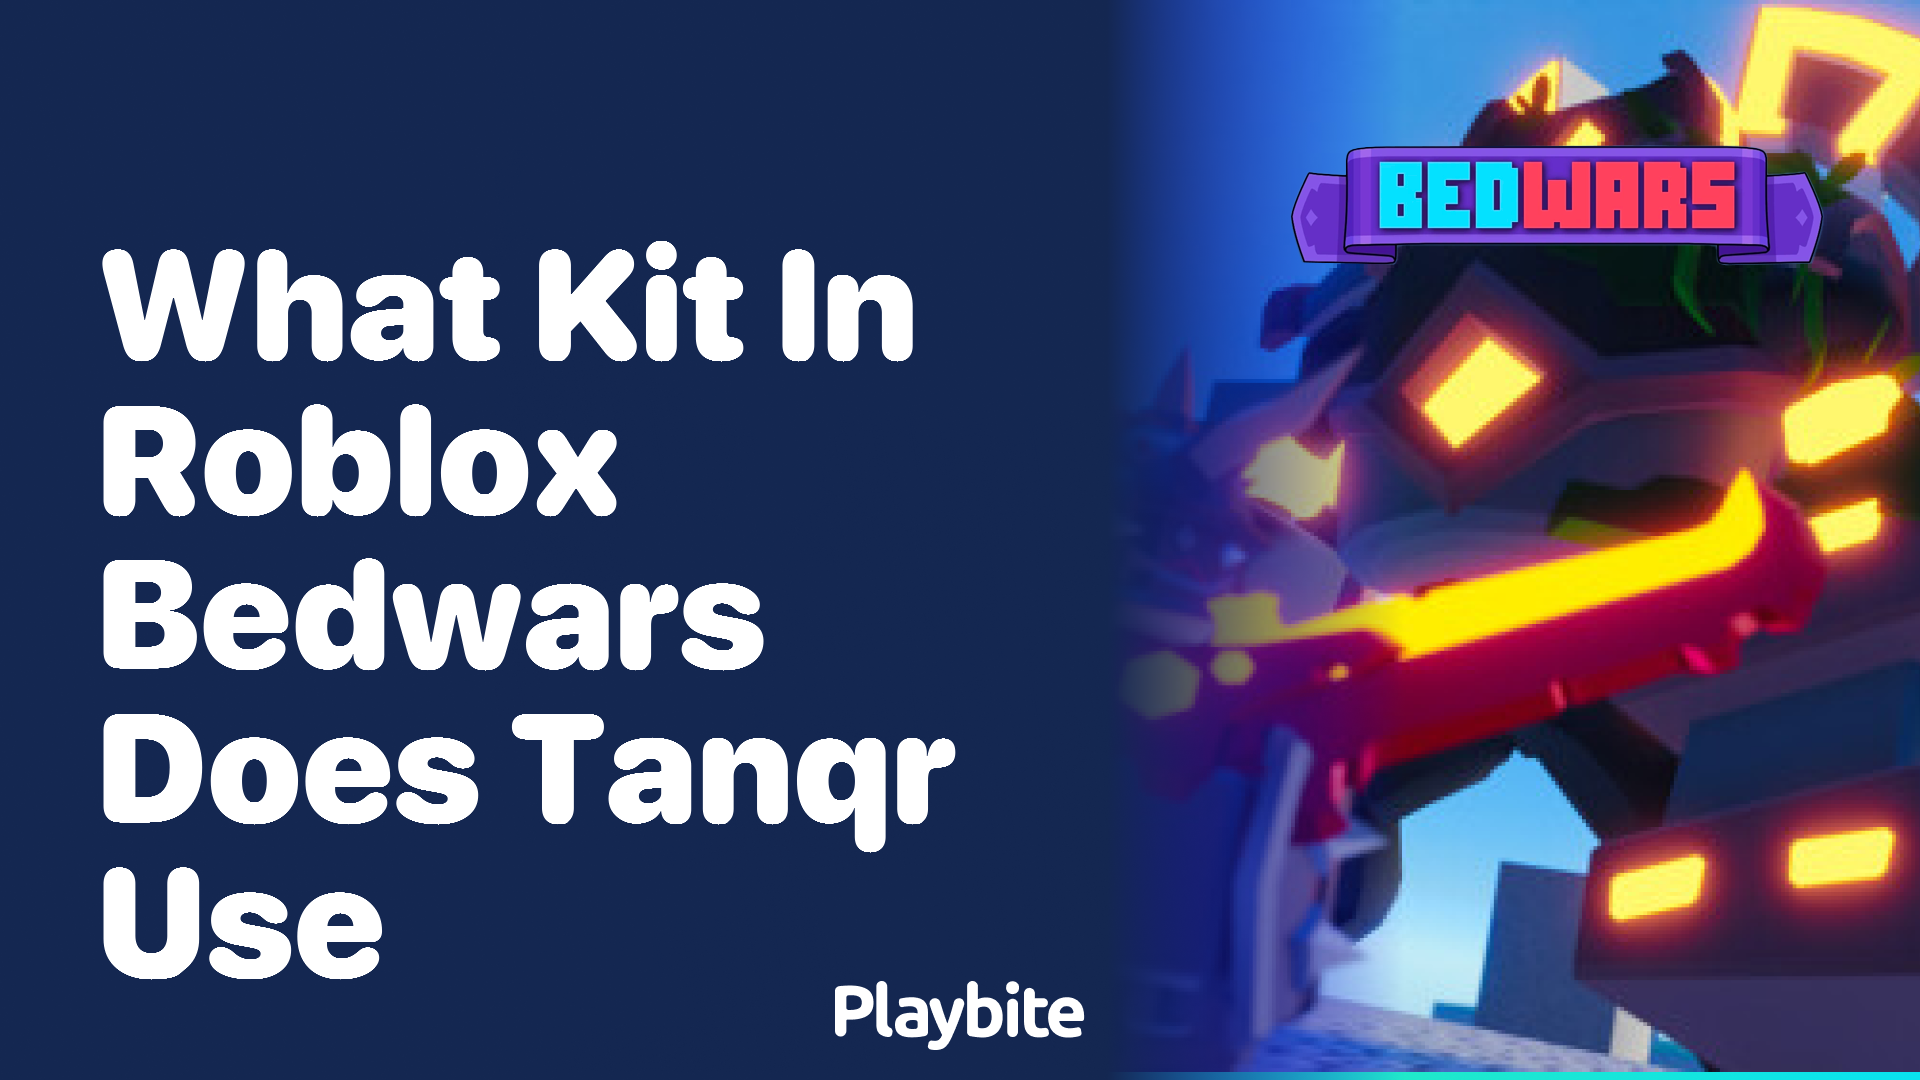 What Kit Does Tanqr Use in Roblox Bedwars?